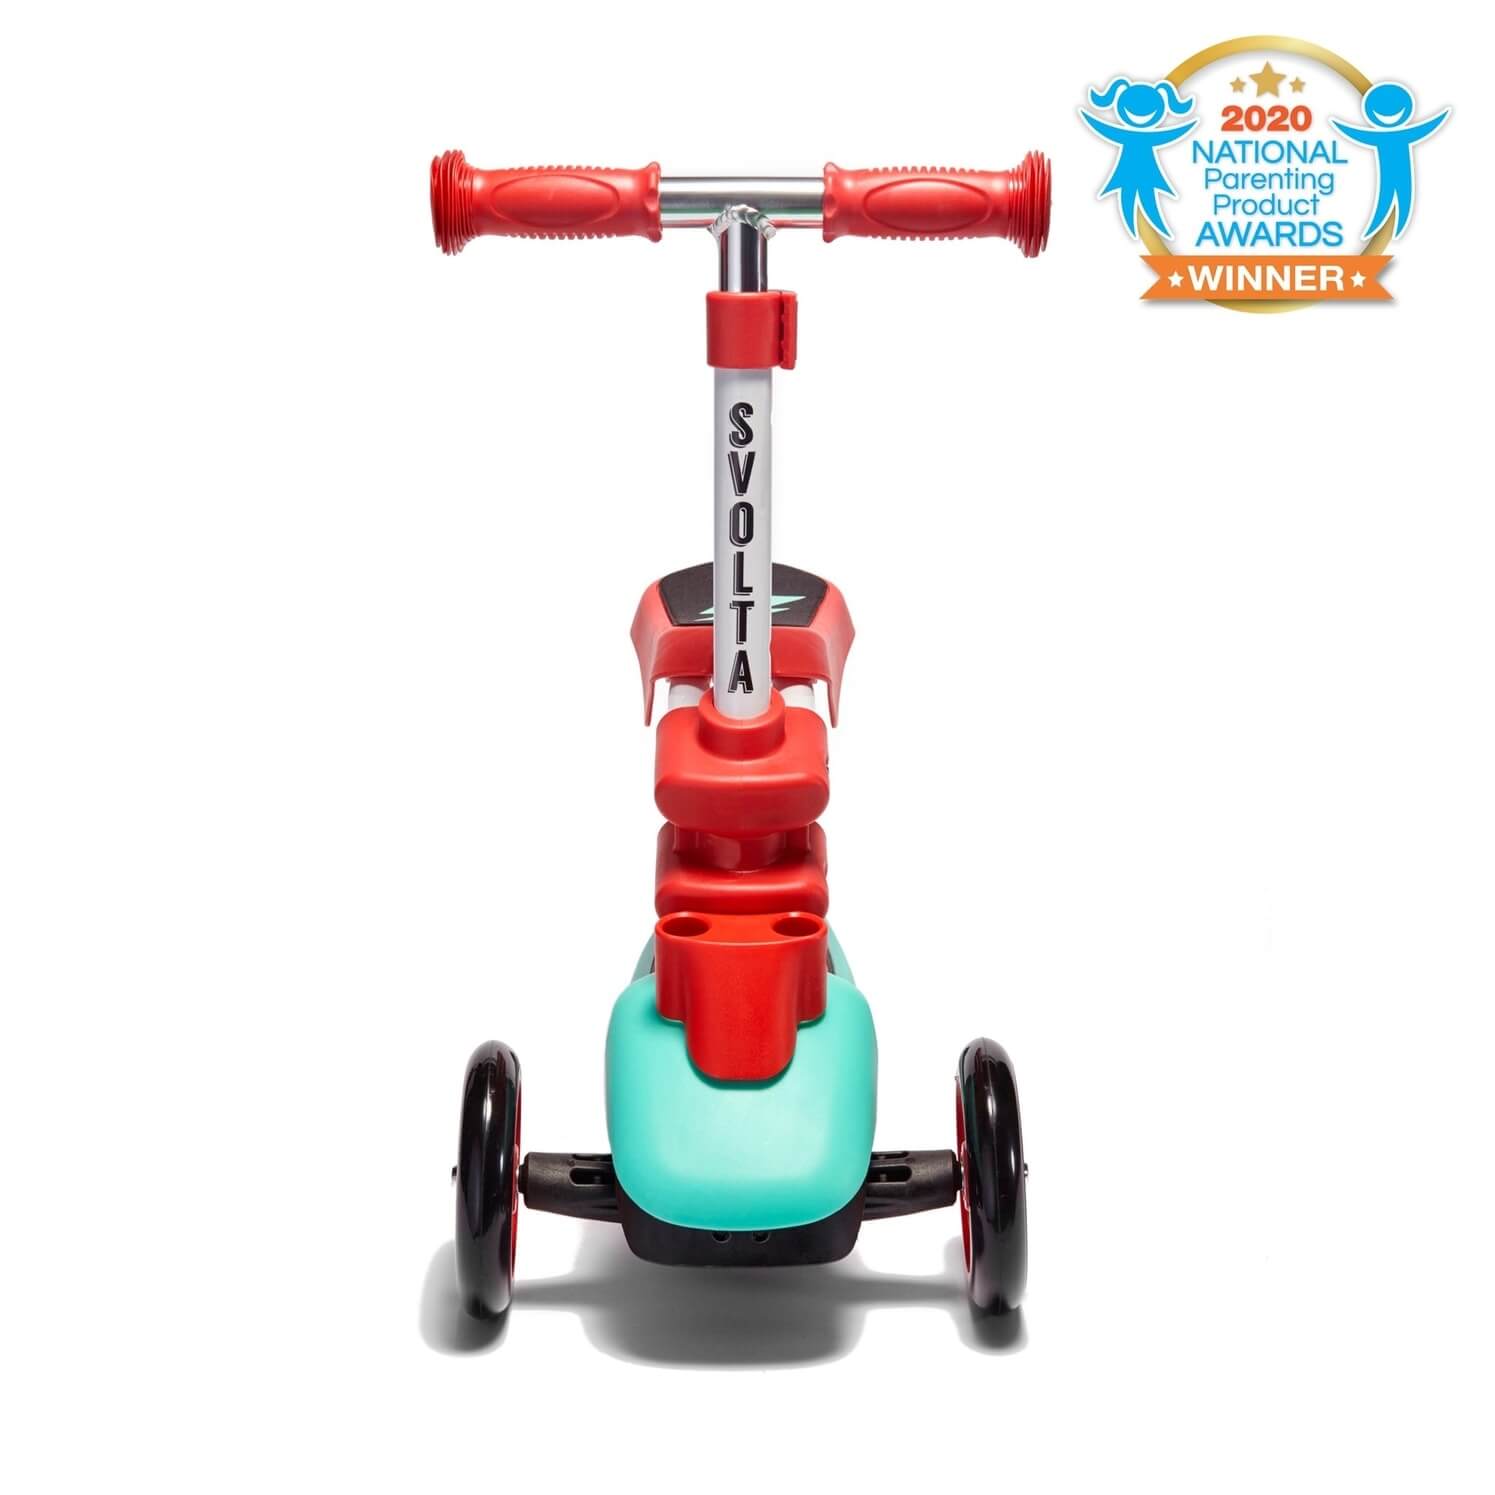 SVOLTA Sit and Stand Toddler Convertible Scooter Red